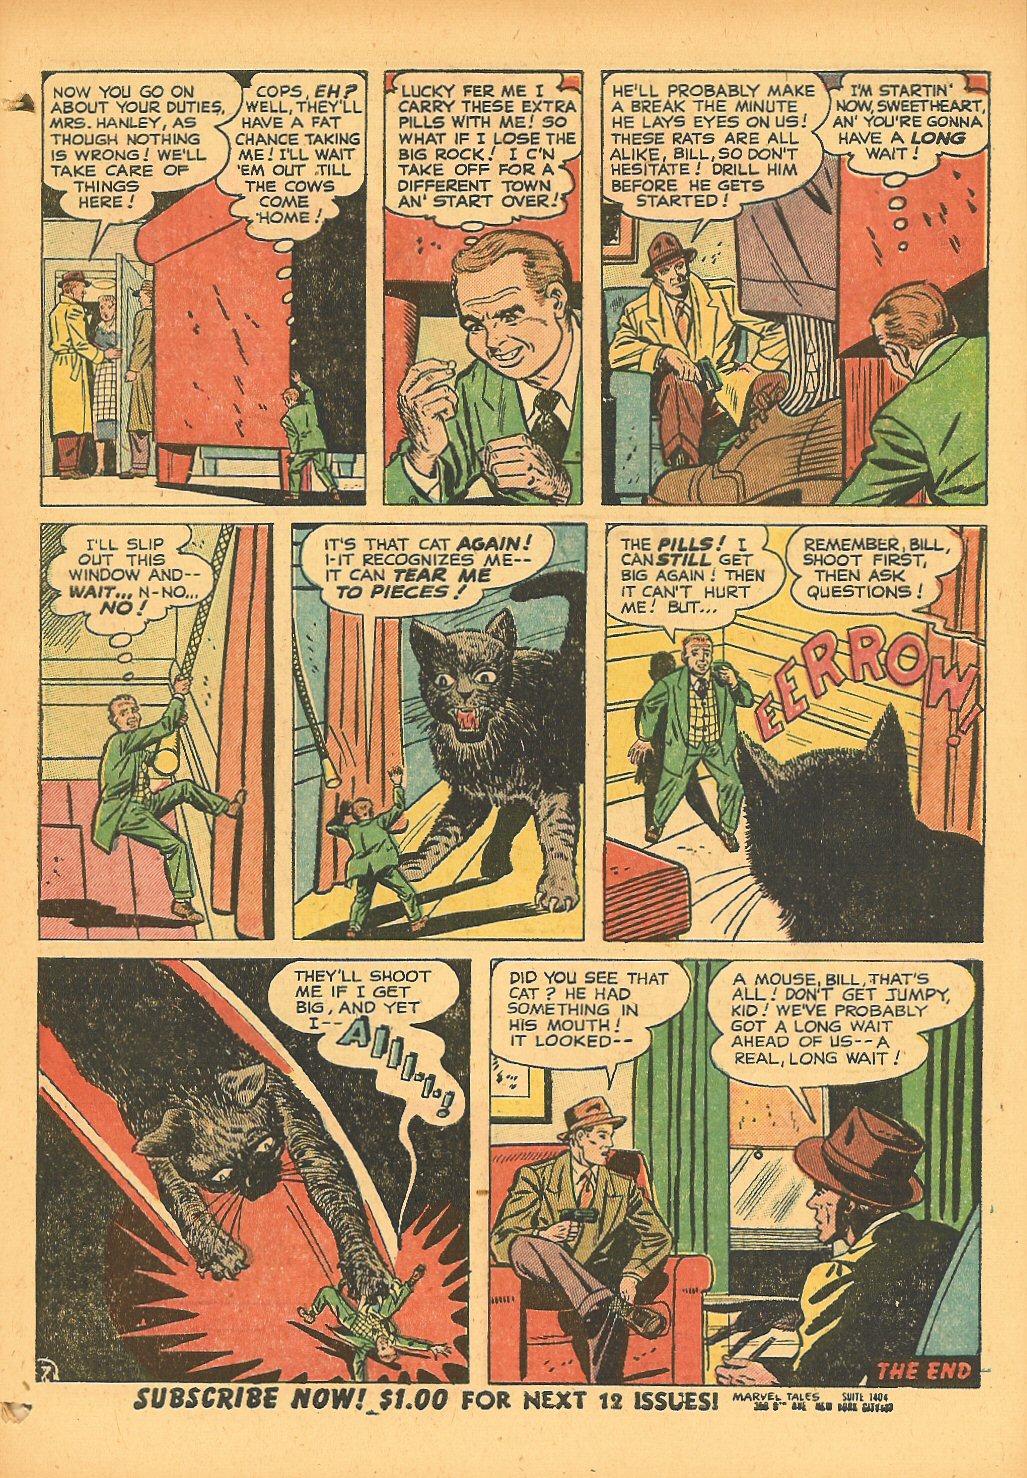 Marvel Tales (1949) 100 Page 7